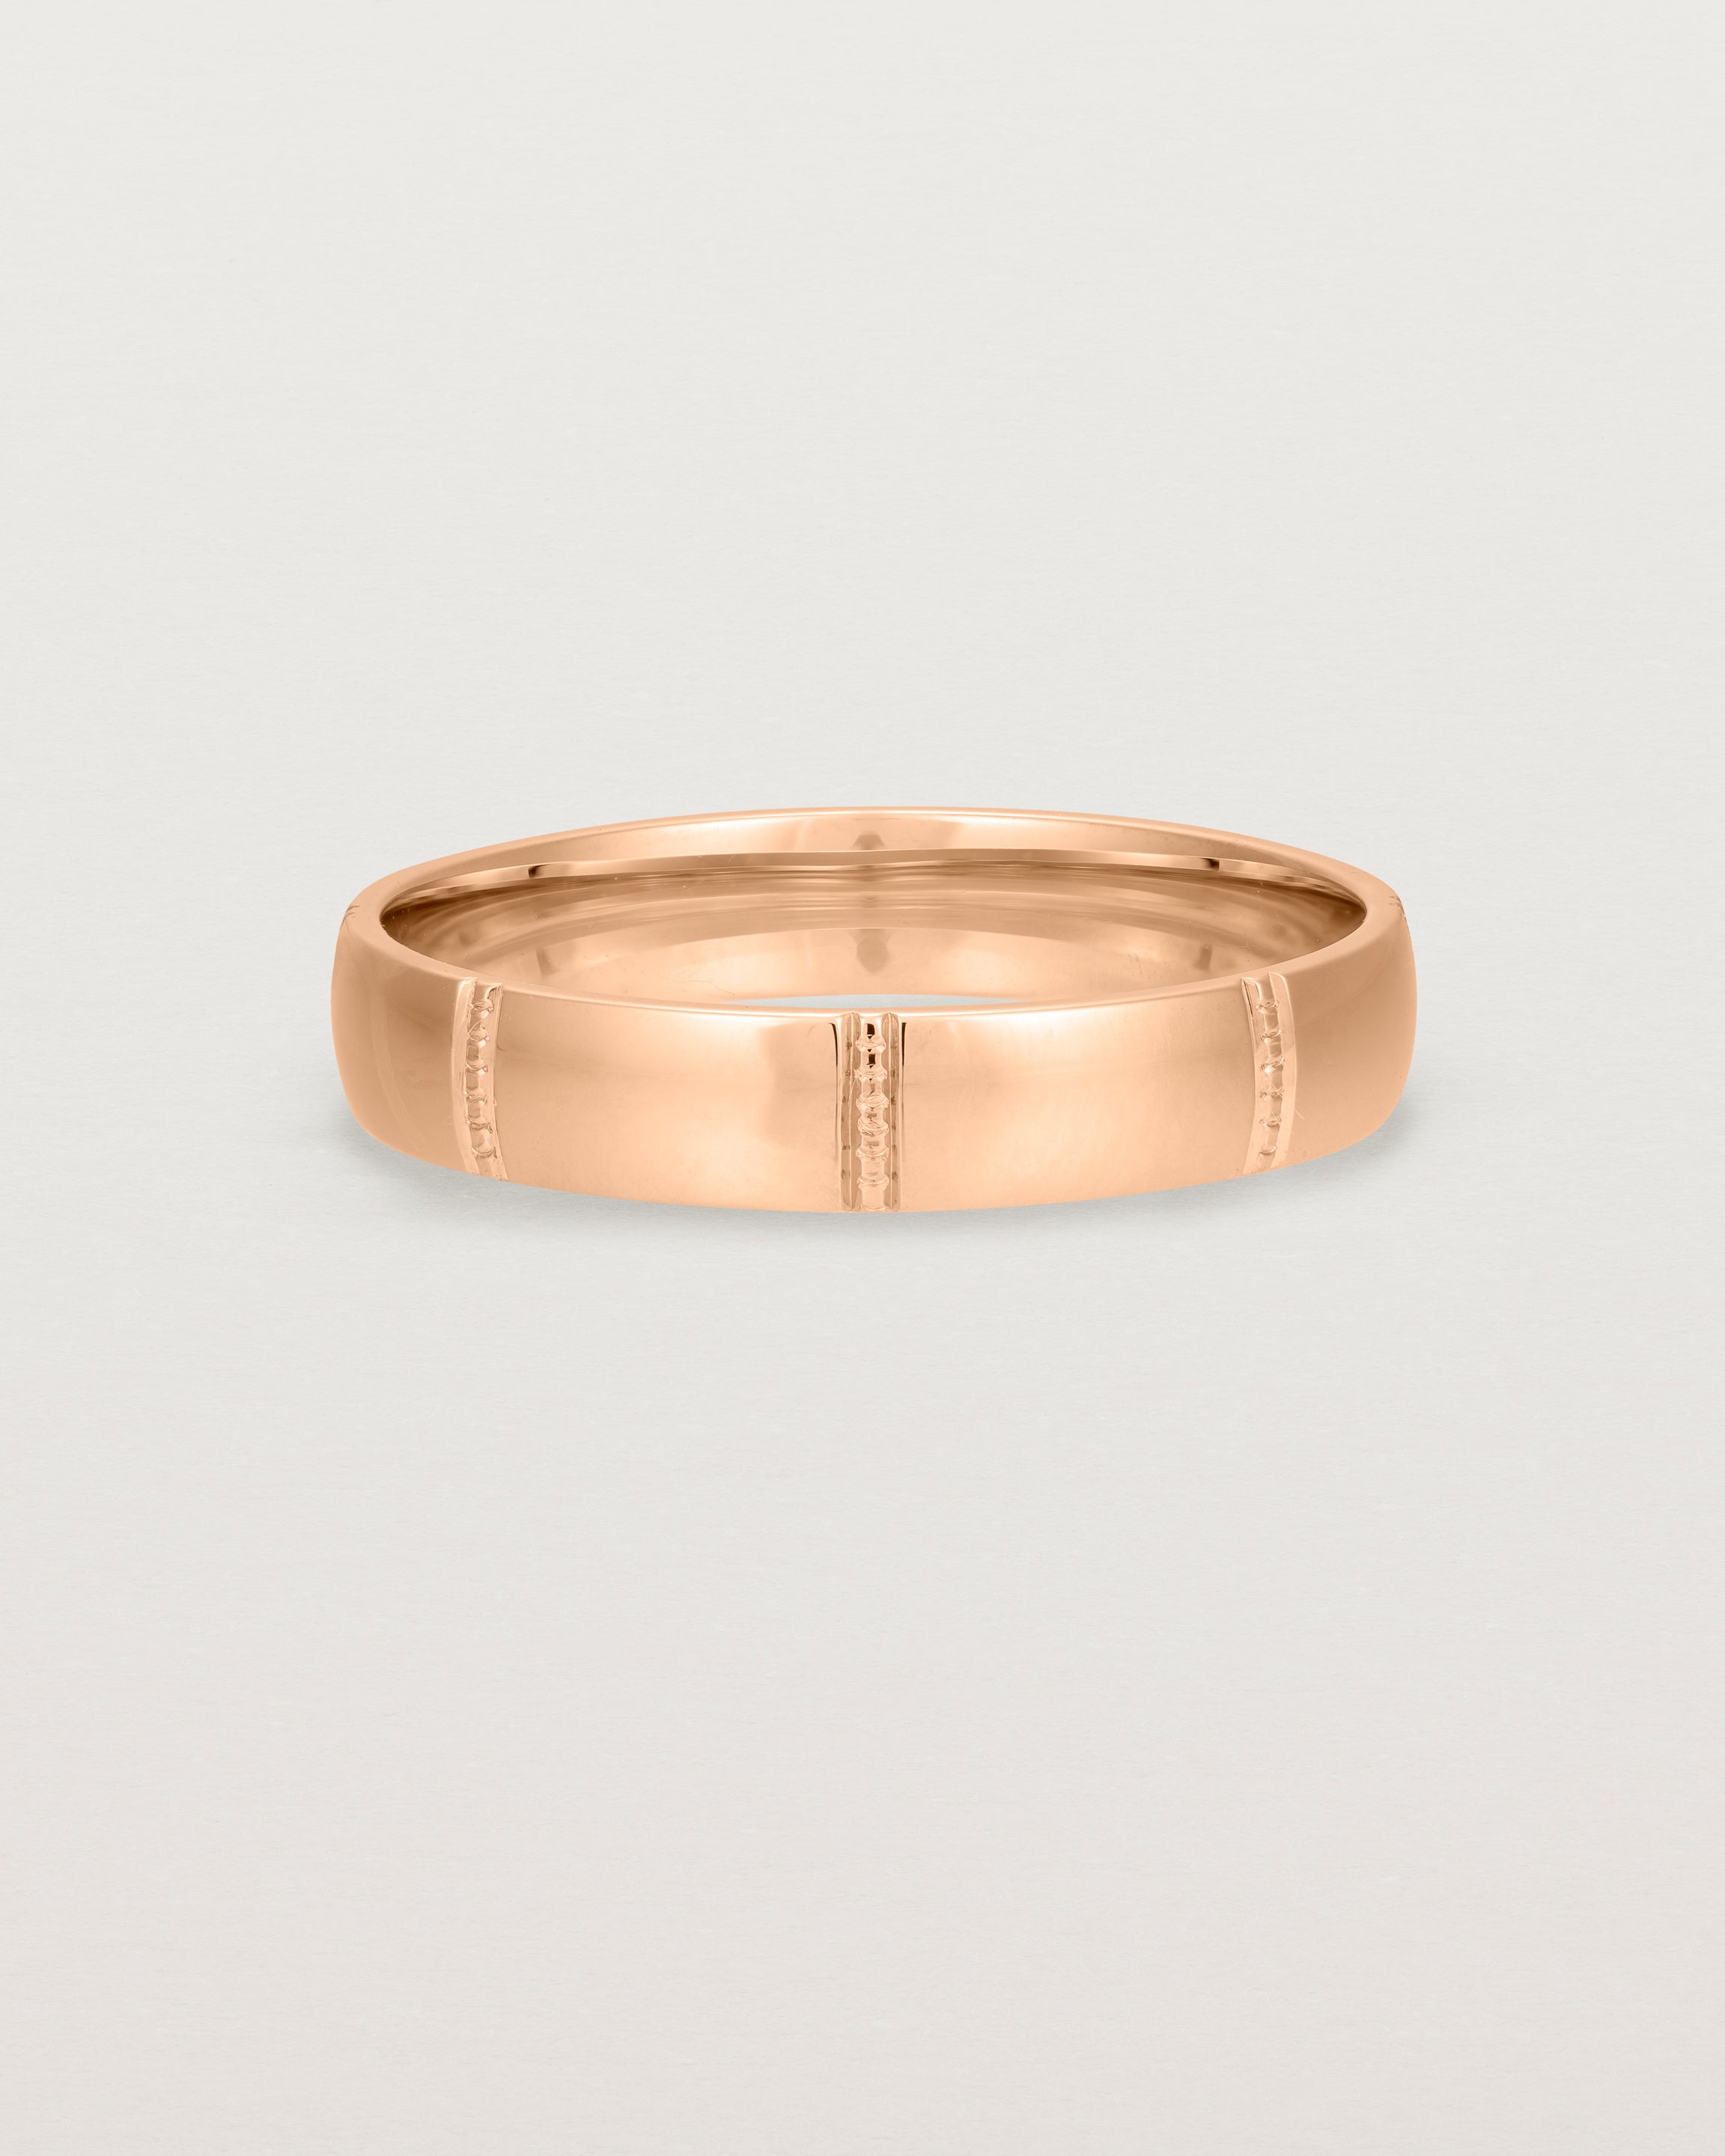 Front view of the Grain Wedding Ring | 4mm | Rose Gold.